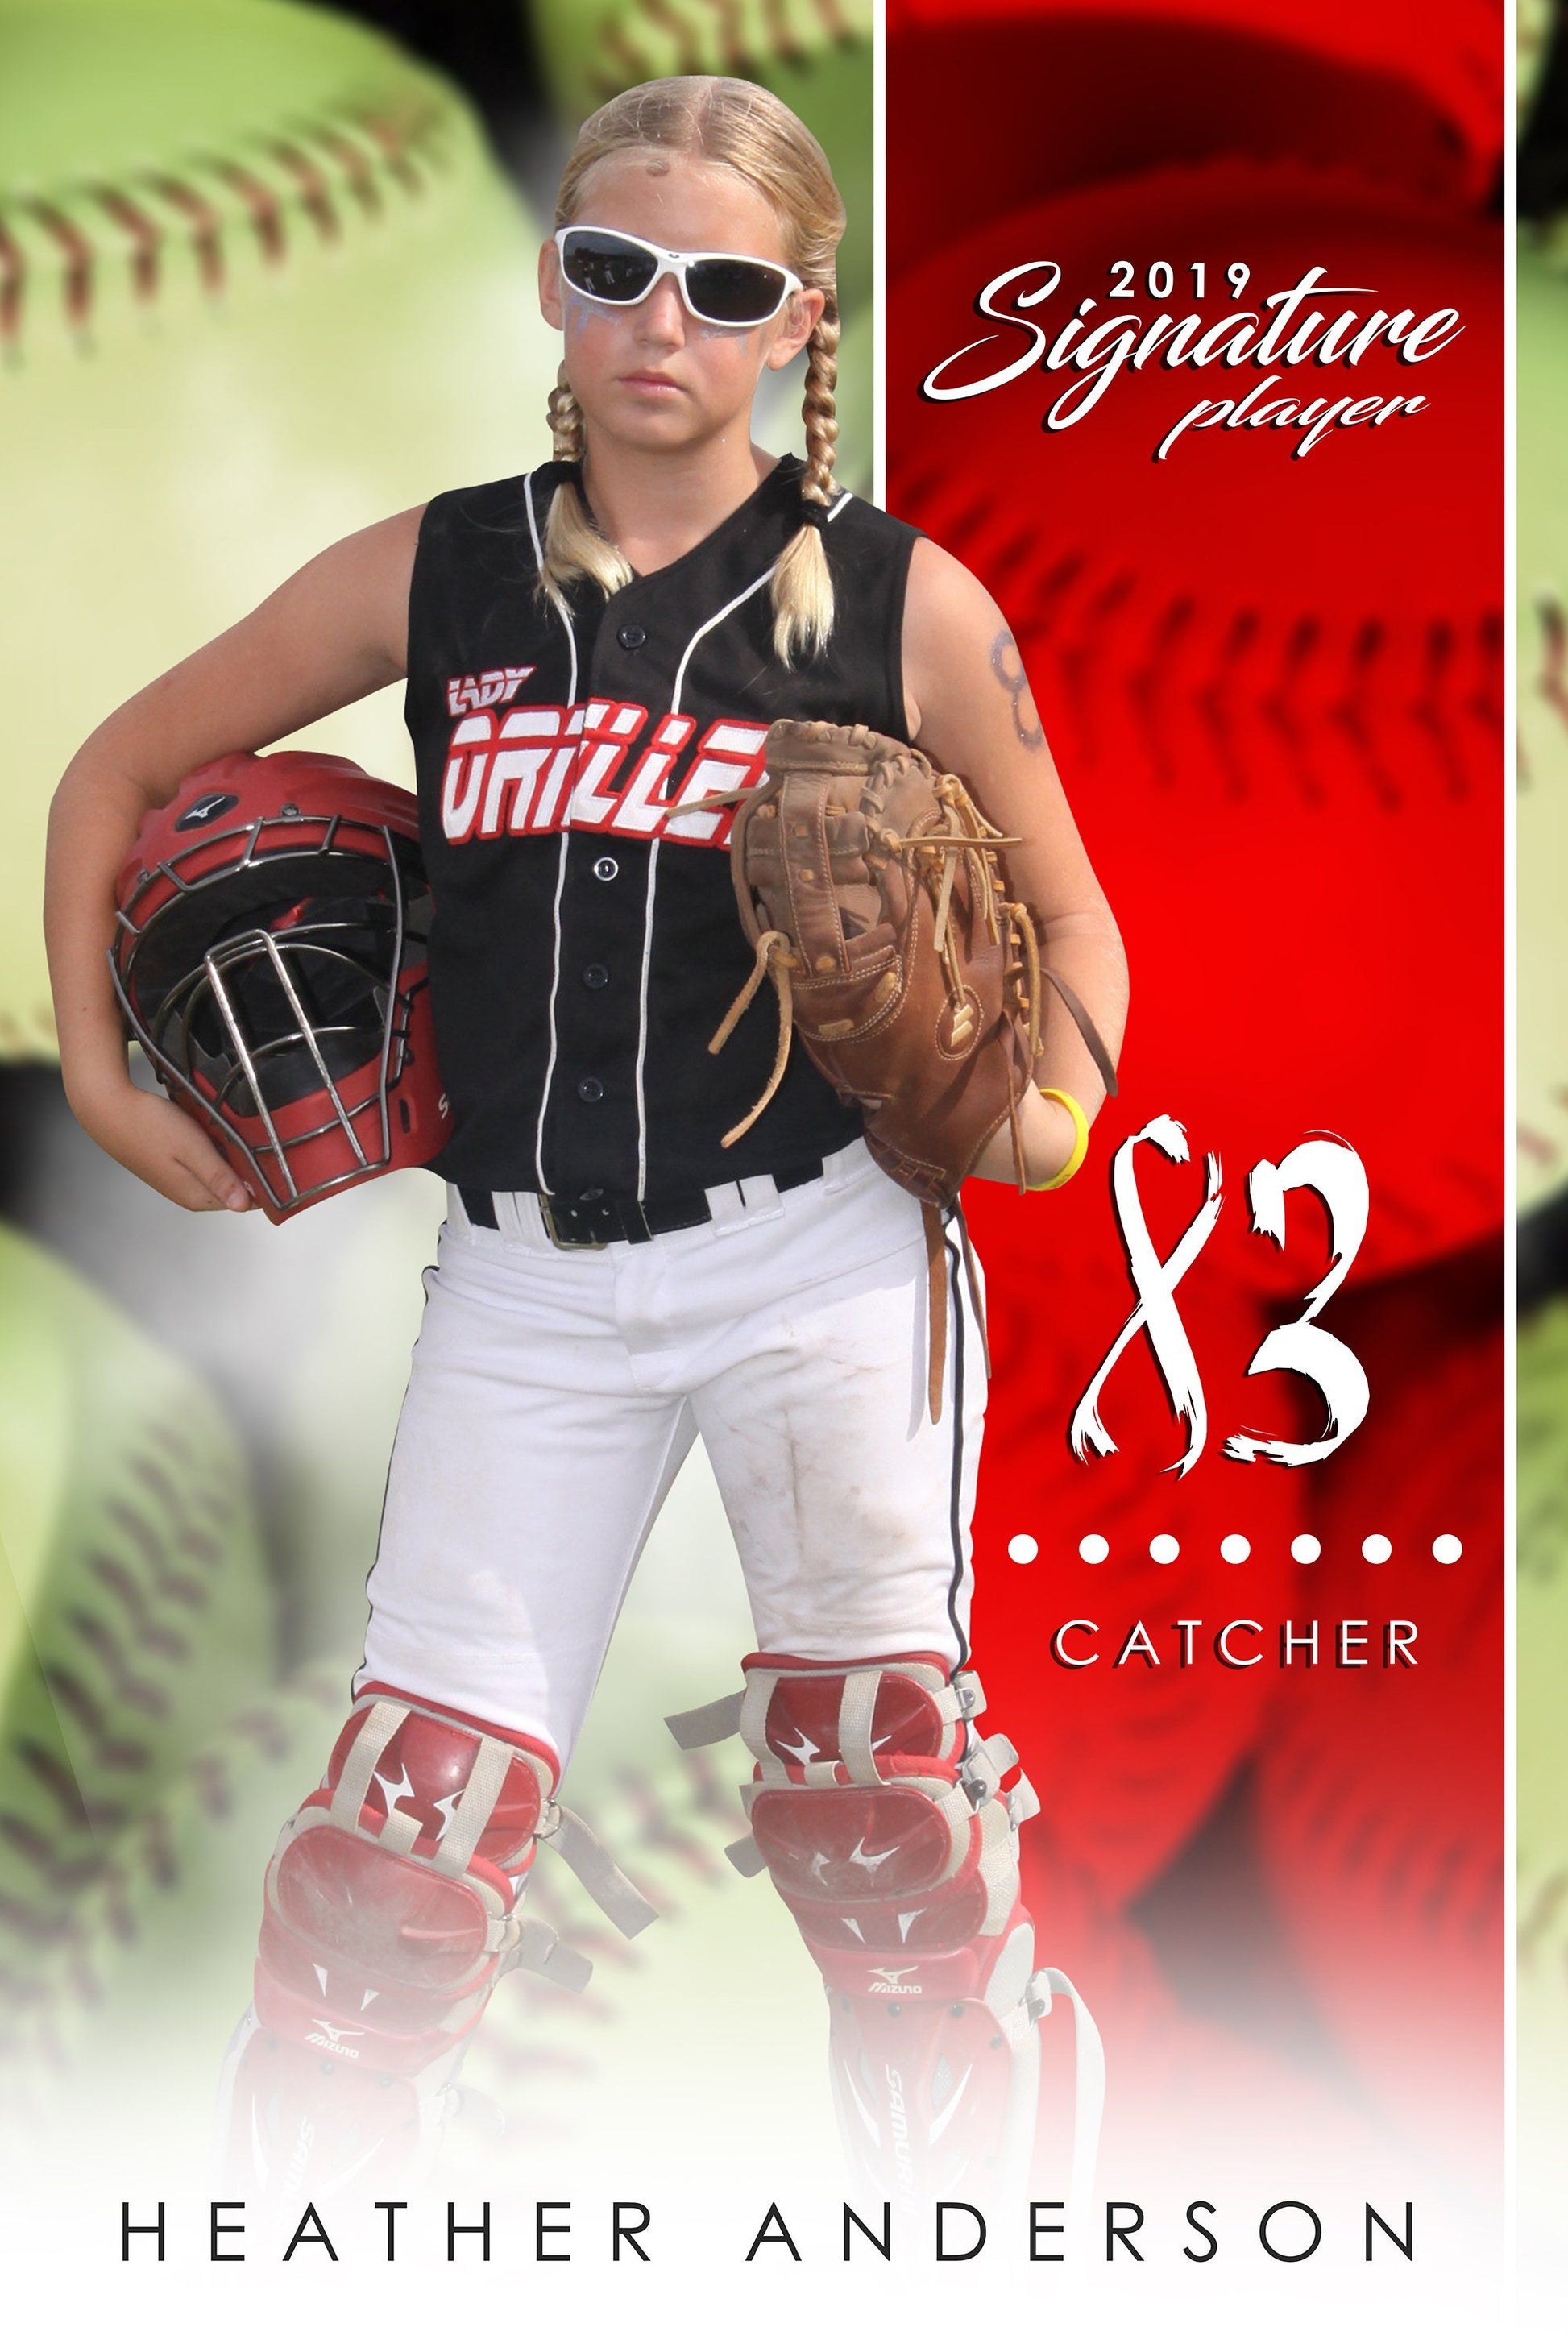 Softball - v.1 - Signature Player - V Poster/Banner-Photoshop Template - Photo Solutions